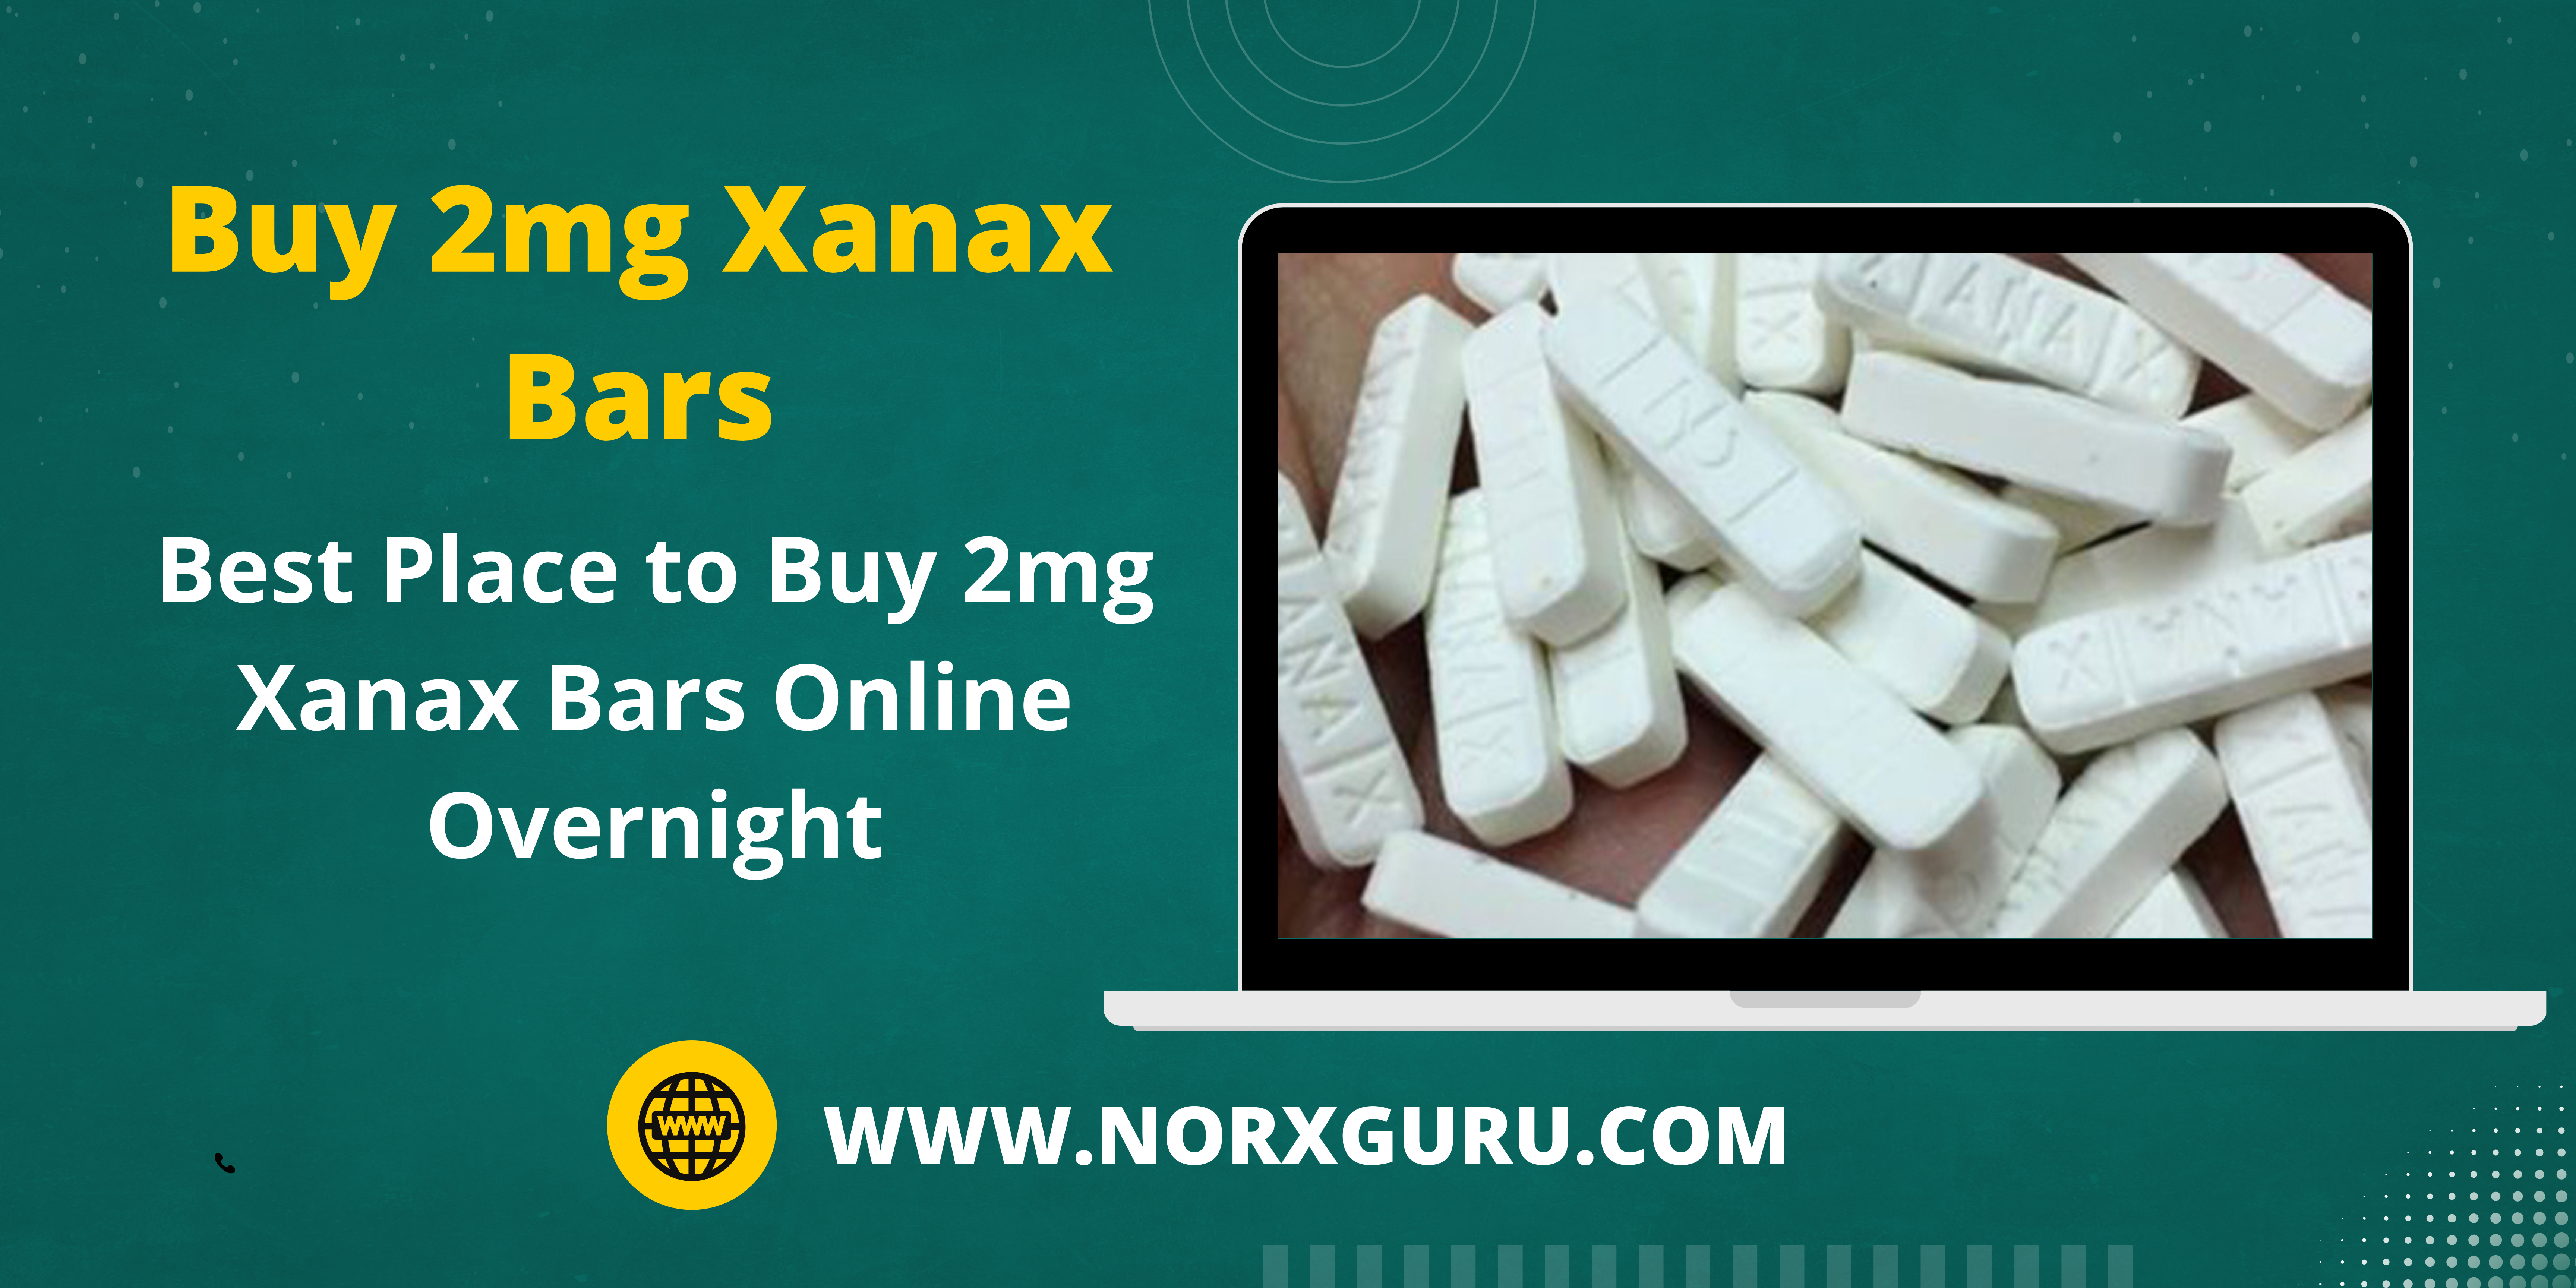 Best Place to Buy 2mg Xanax Bars Online Overnight